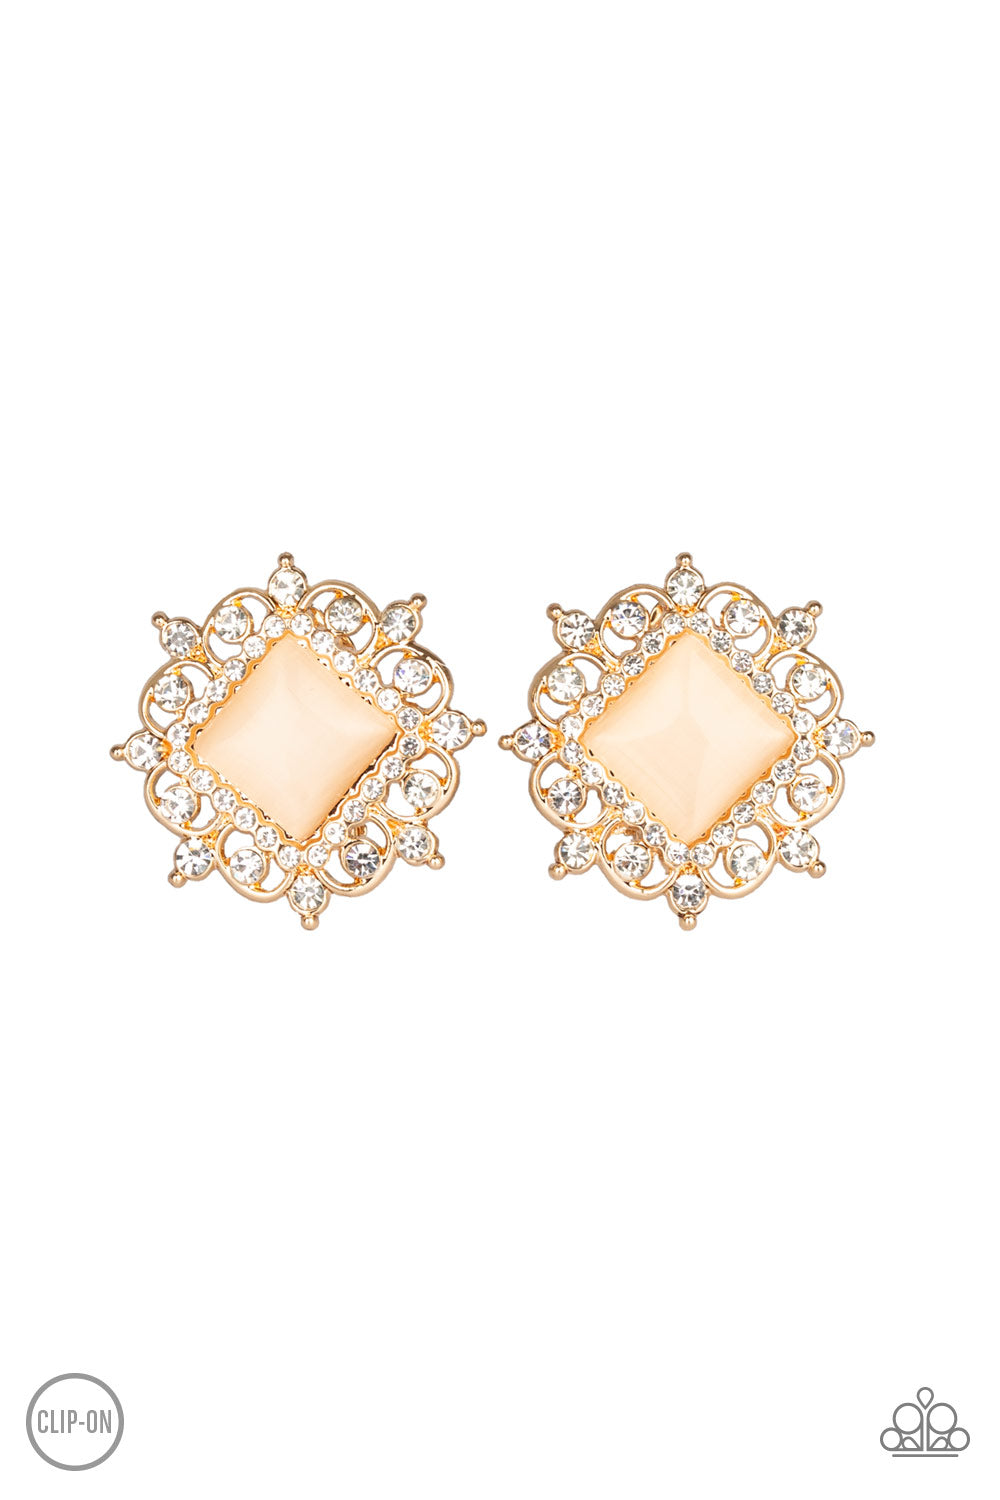 Get Rich Quick Gold Clip-on Paparazzi Earrings Cashmere Pink Jewels - Cashmere Pink Jewels & Accessories, Cashmere Pink Jewels & Accessories - Paparazzi